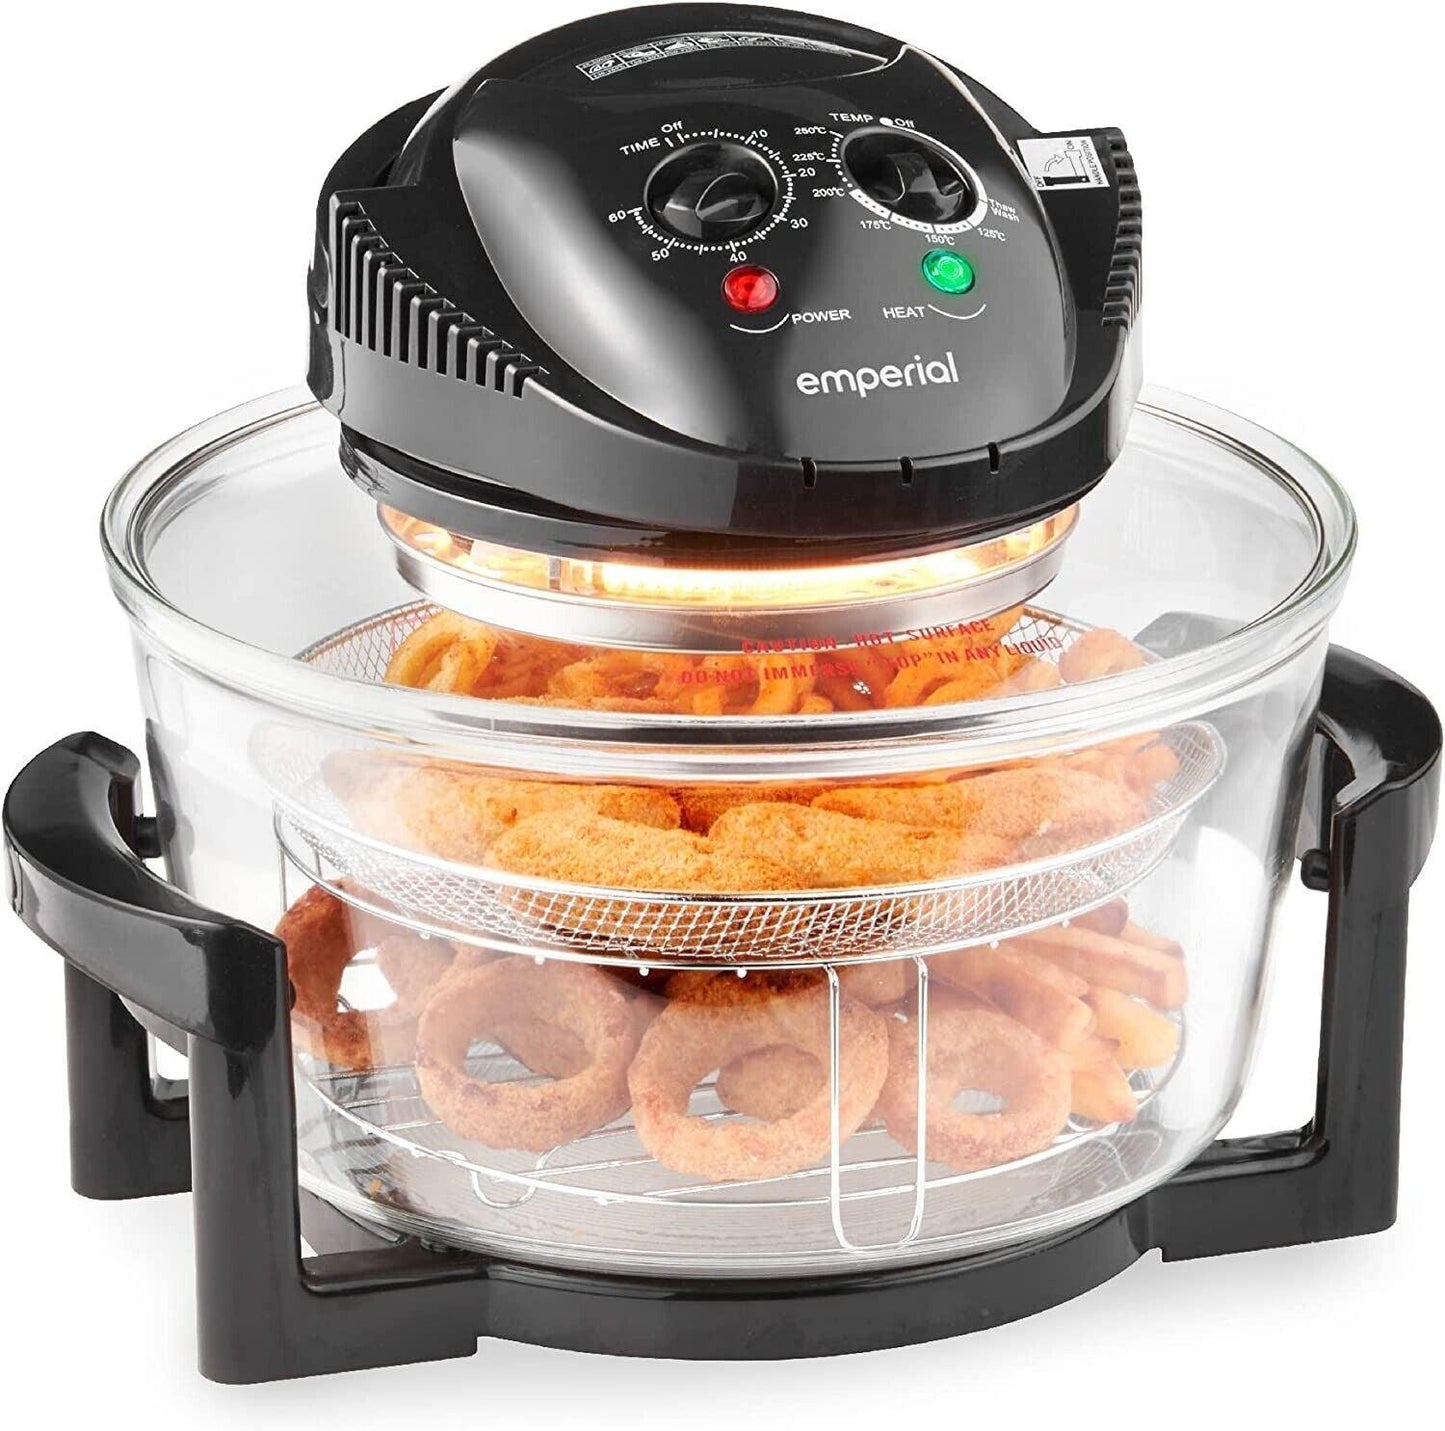 Emperial 17L Halogen Convection Air Fryer with Extender Ring - Click